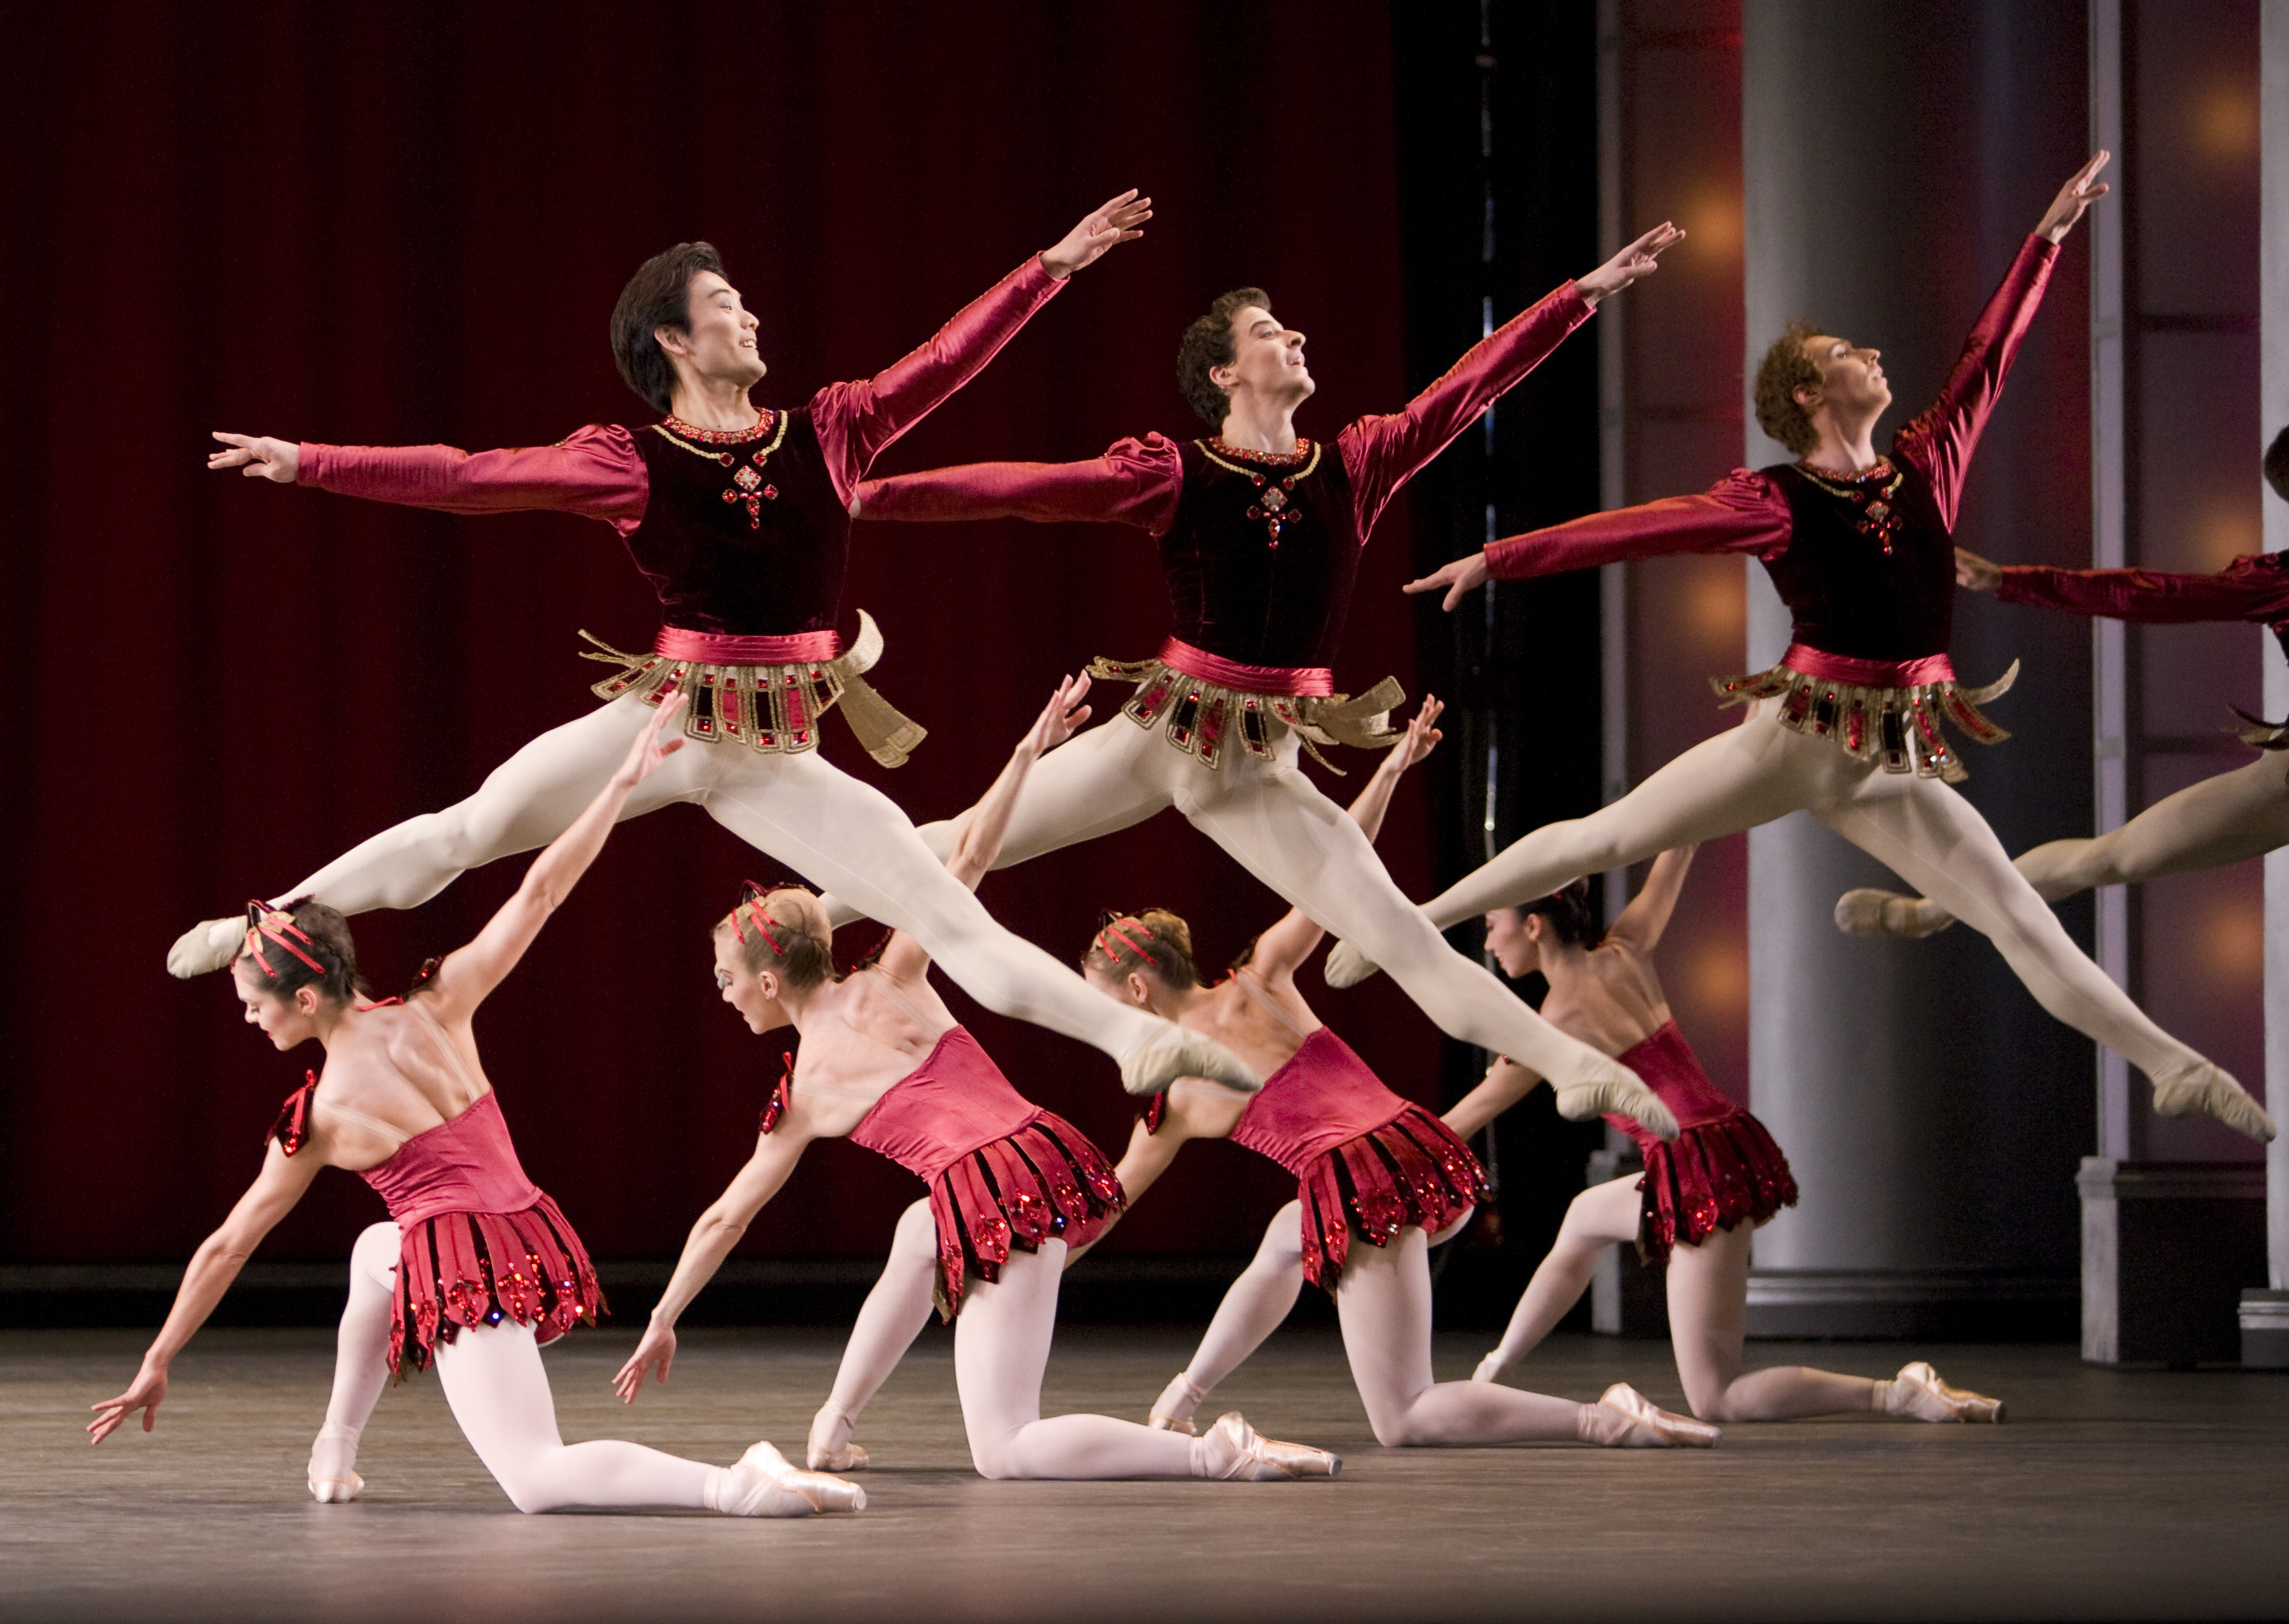 http://markronan.files.wordpress.com/2011/09/2-danncers-of-the-royal-ballet-in-rubies-jewels-photo-roh-johan-persson.jpg